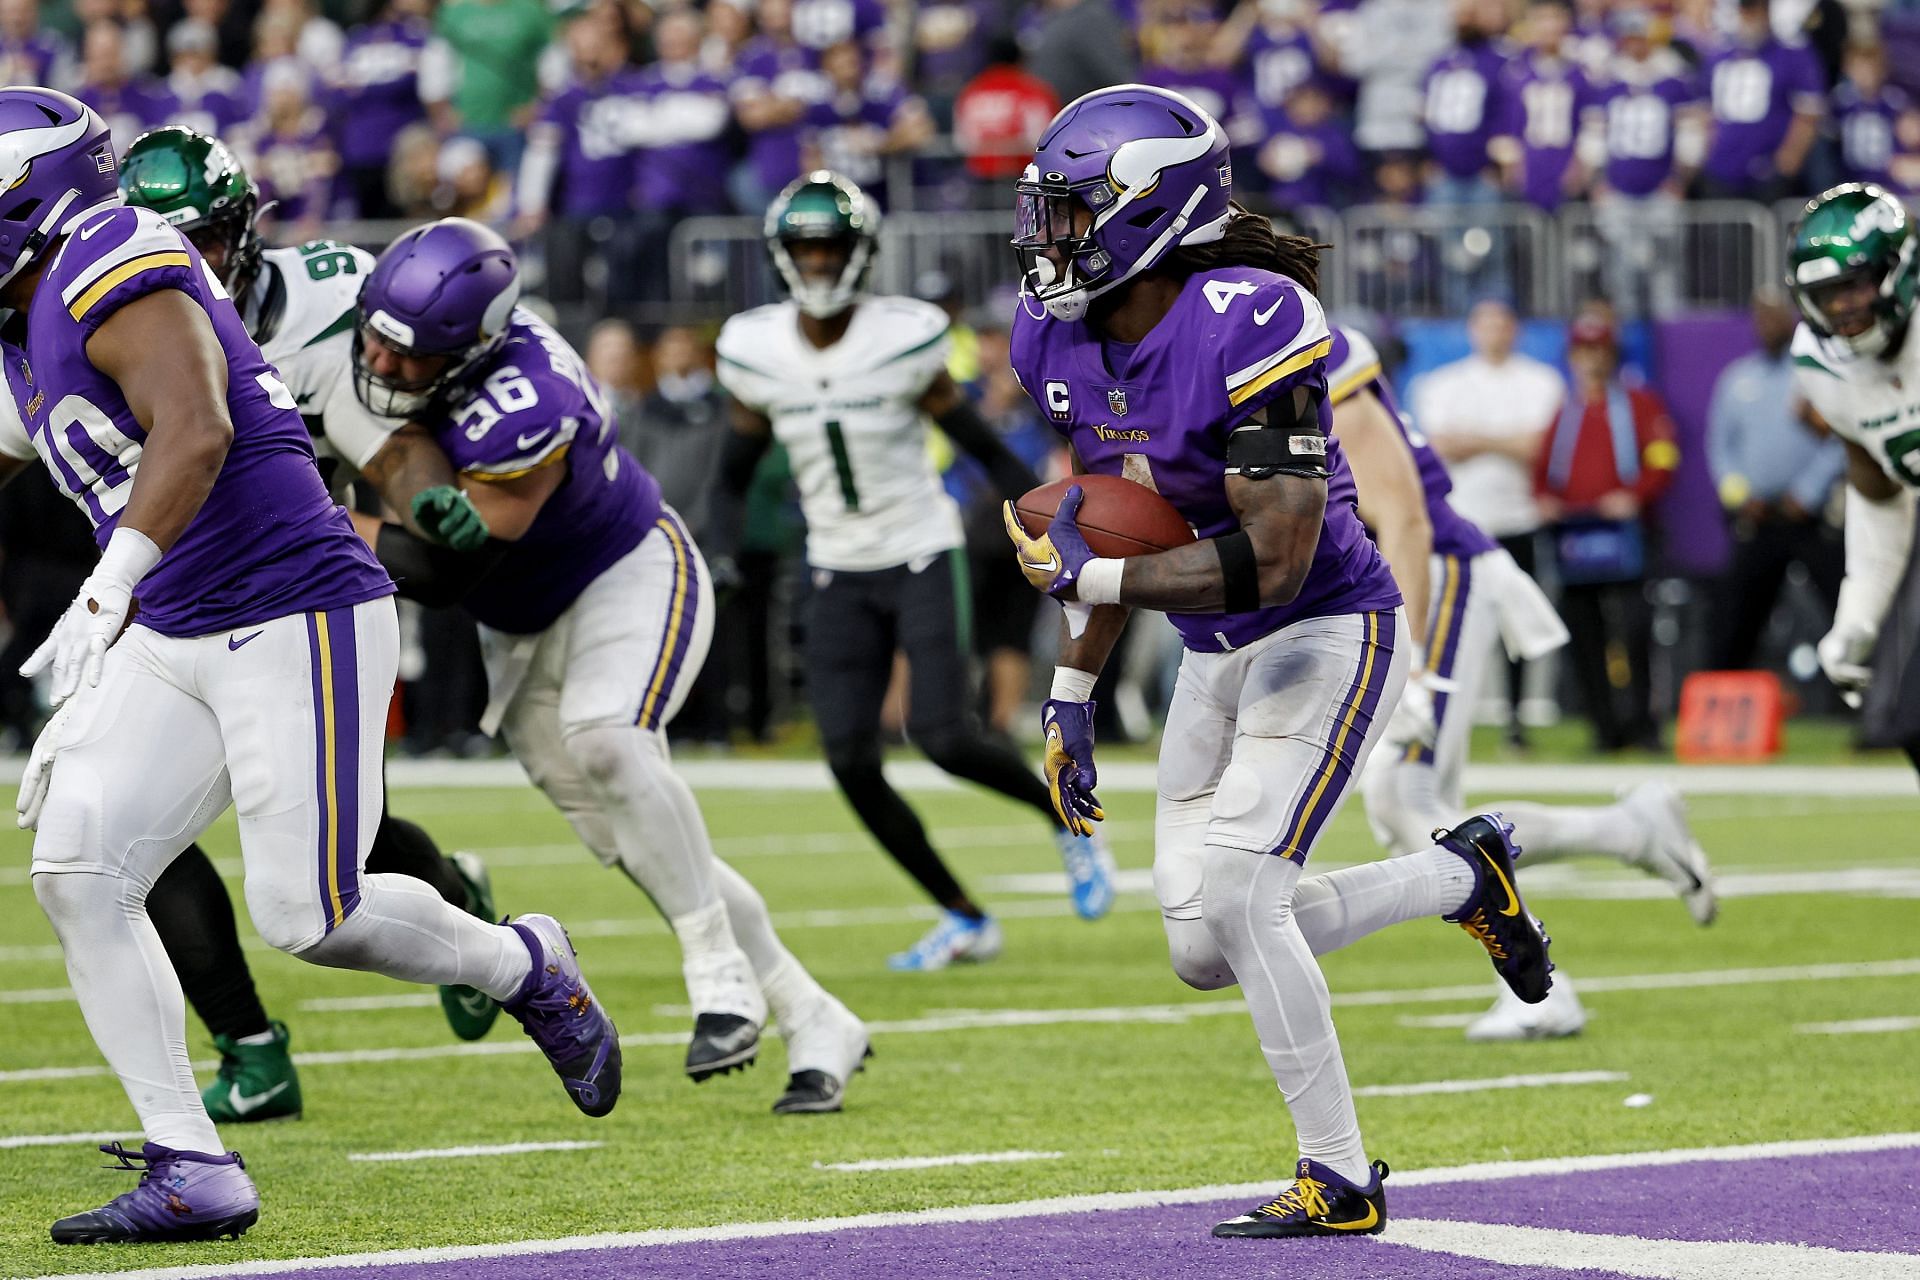 Dalvin Cook rushes against the New York Jets, his future team